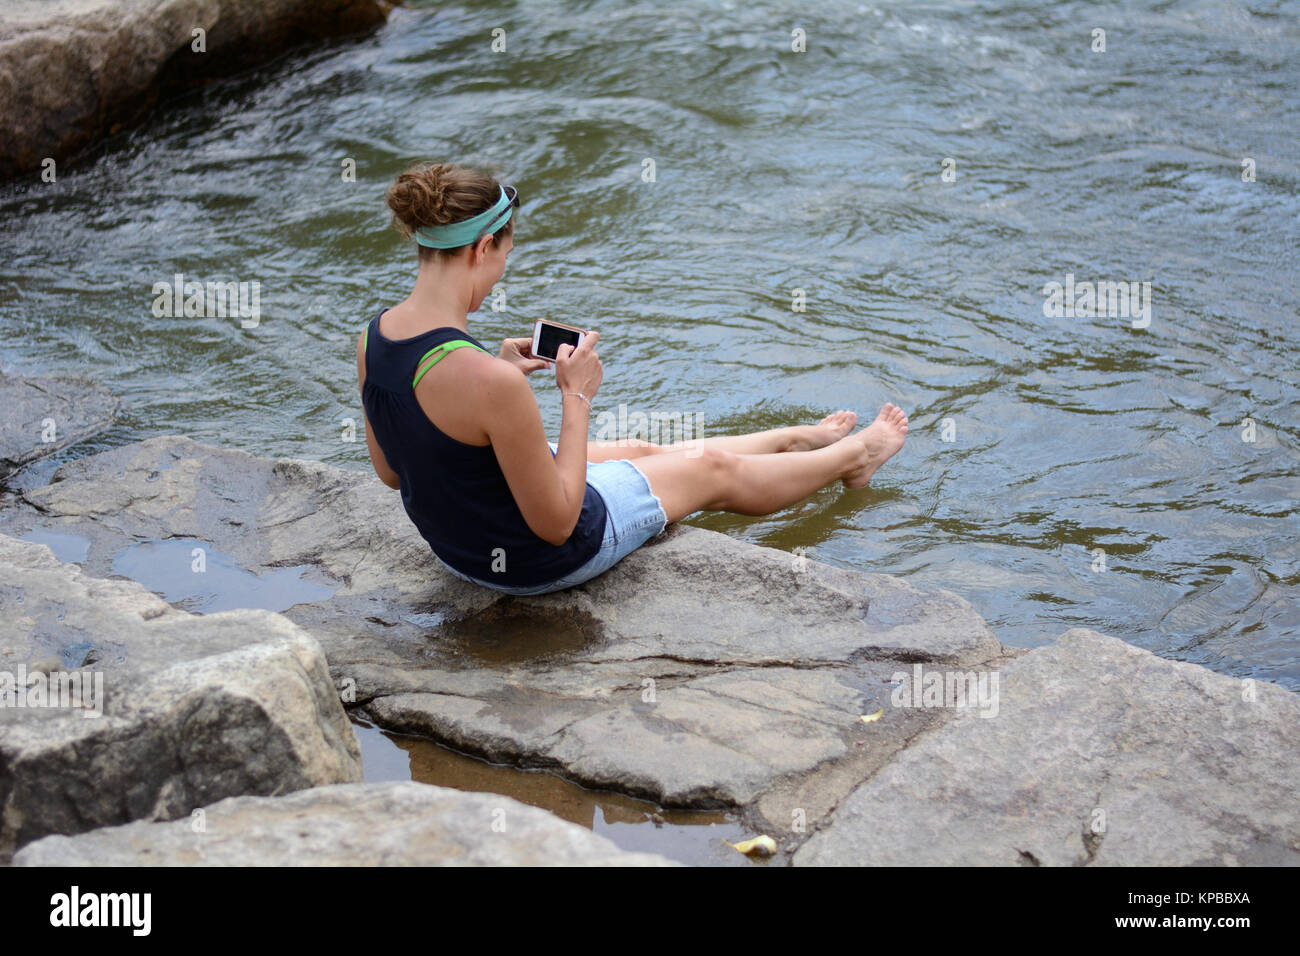 Woman checking her phone while relaxing and cooling off while dipping her legs in water of creek Stock Photo